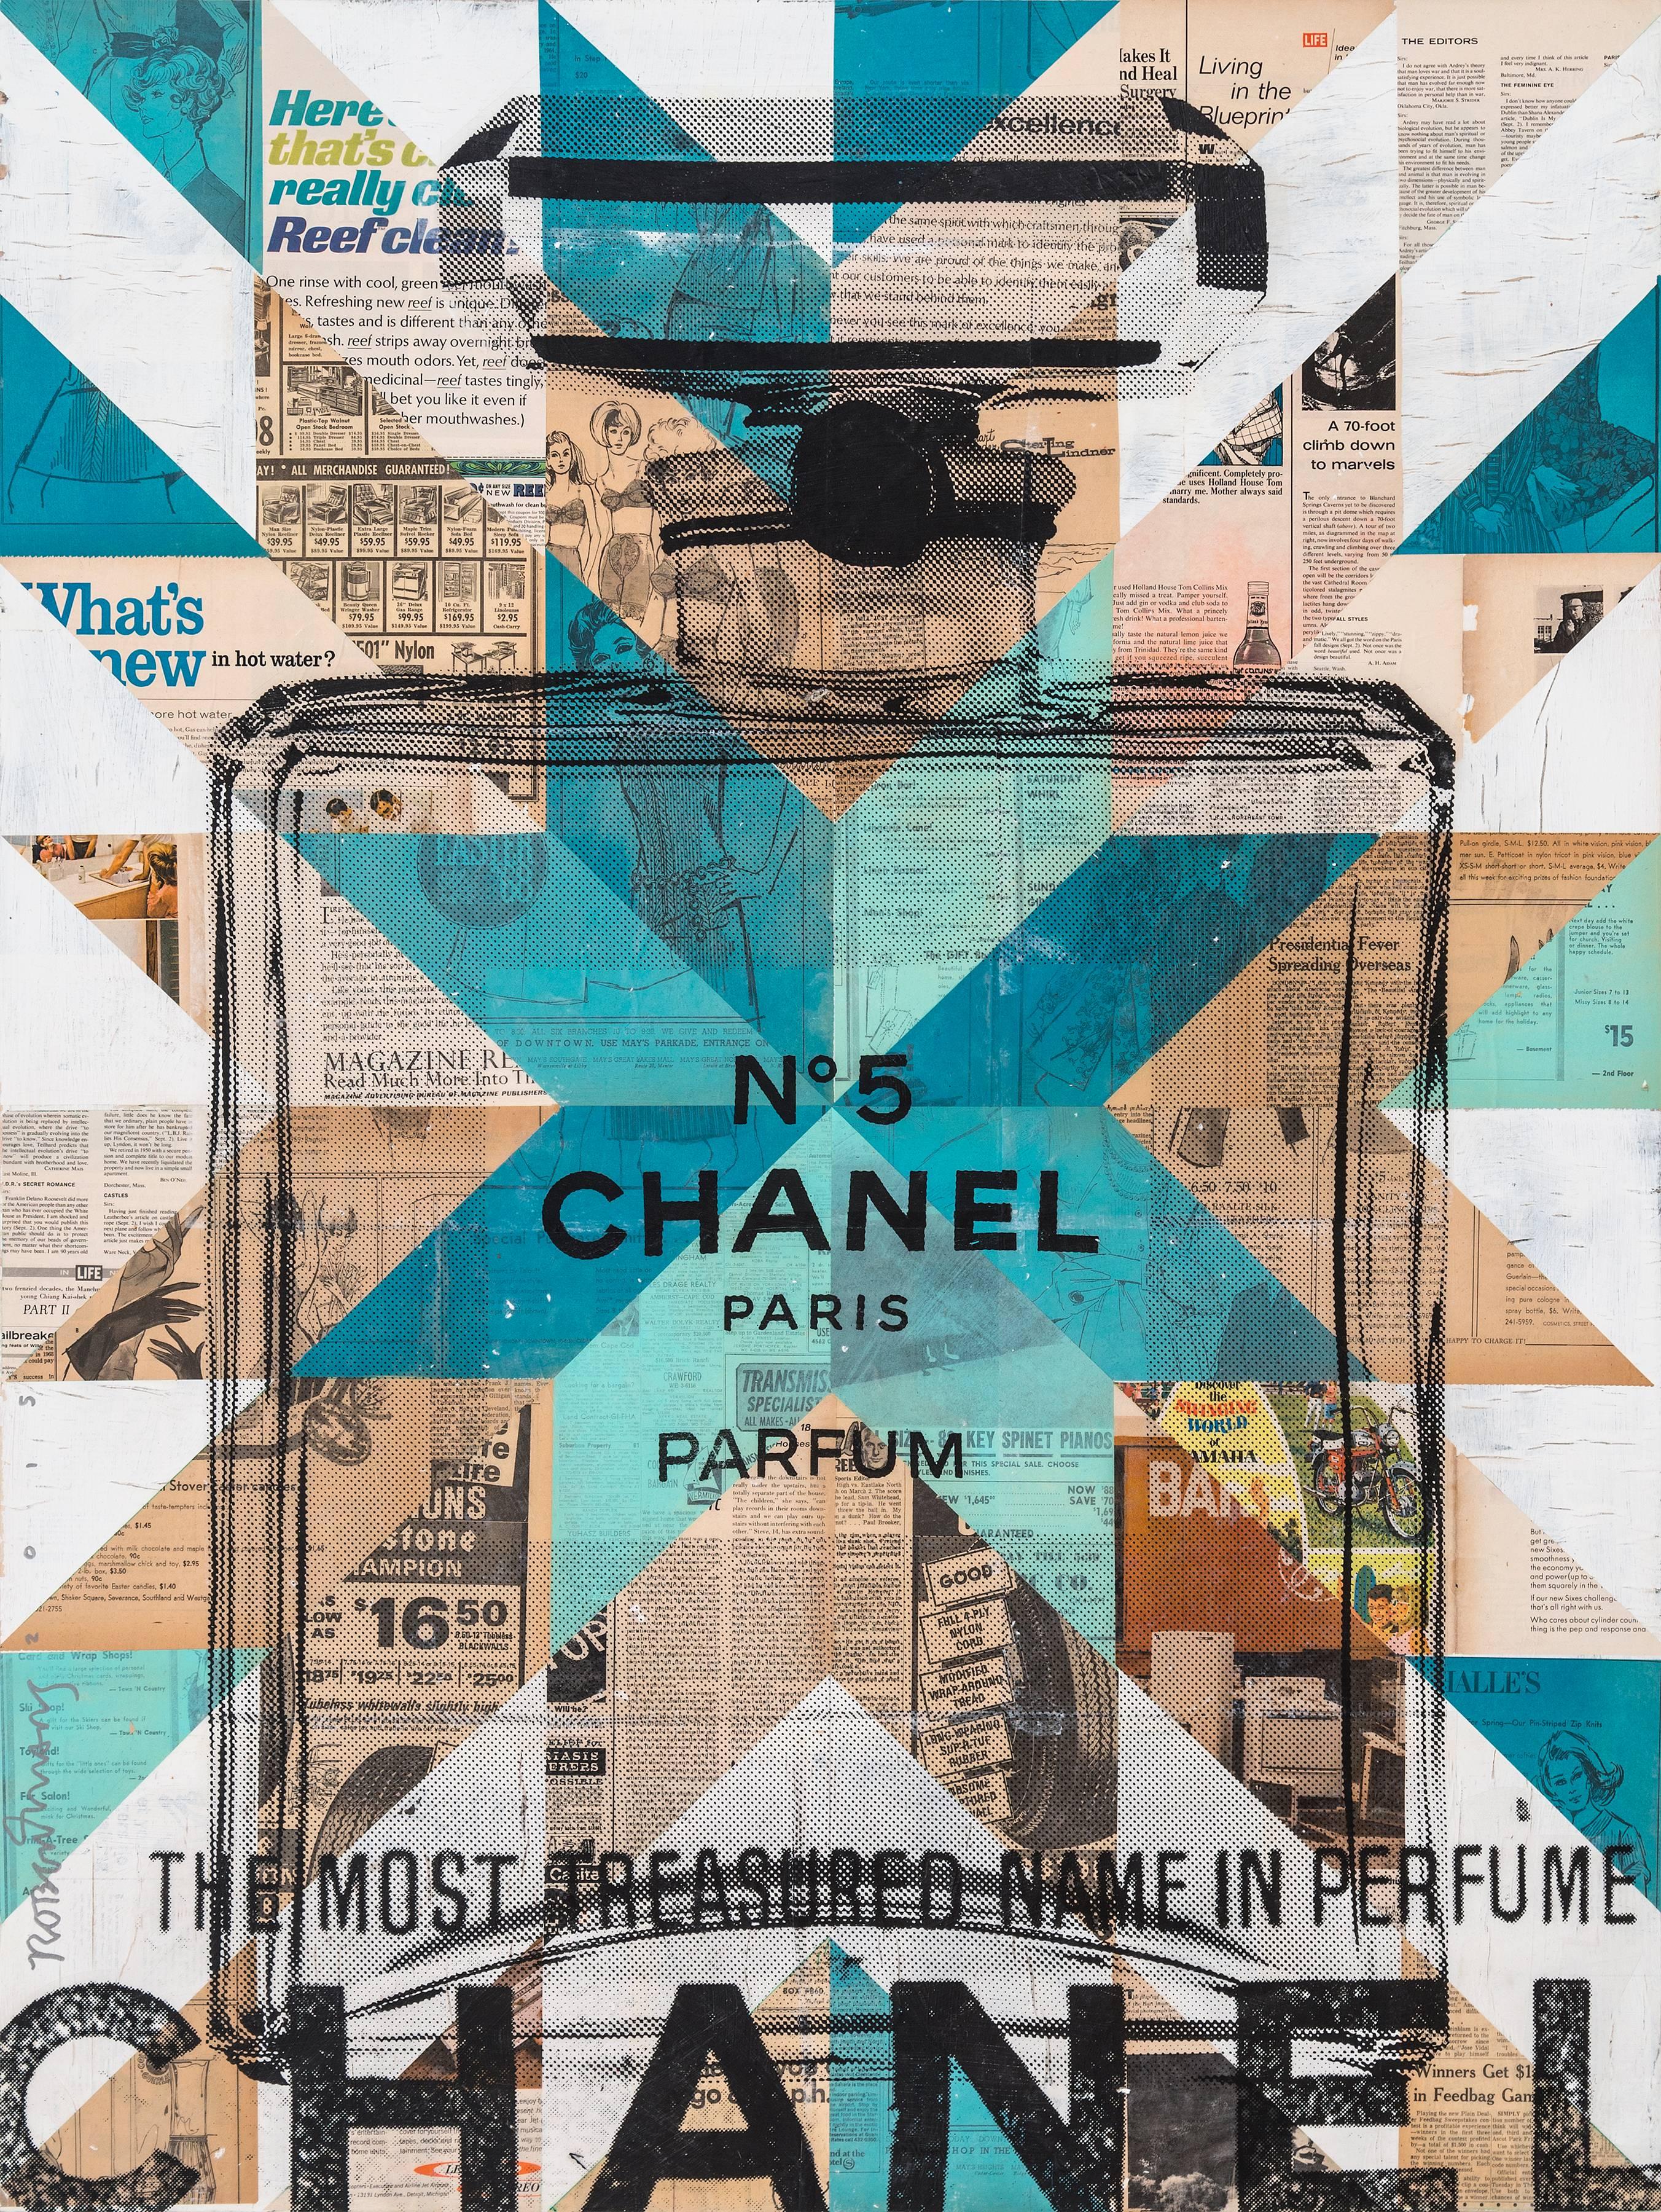 You’re The Good Things Chanel - Mixed Media Art by Robert Mars